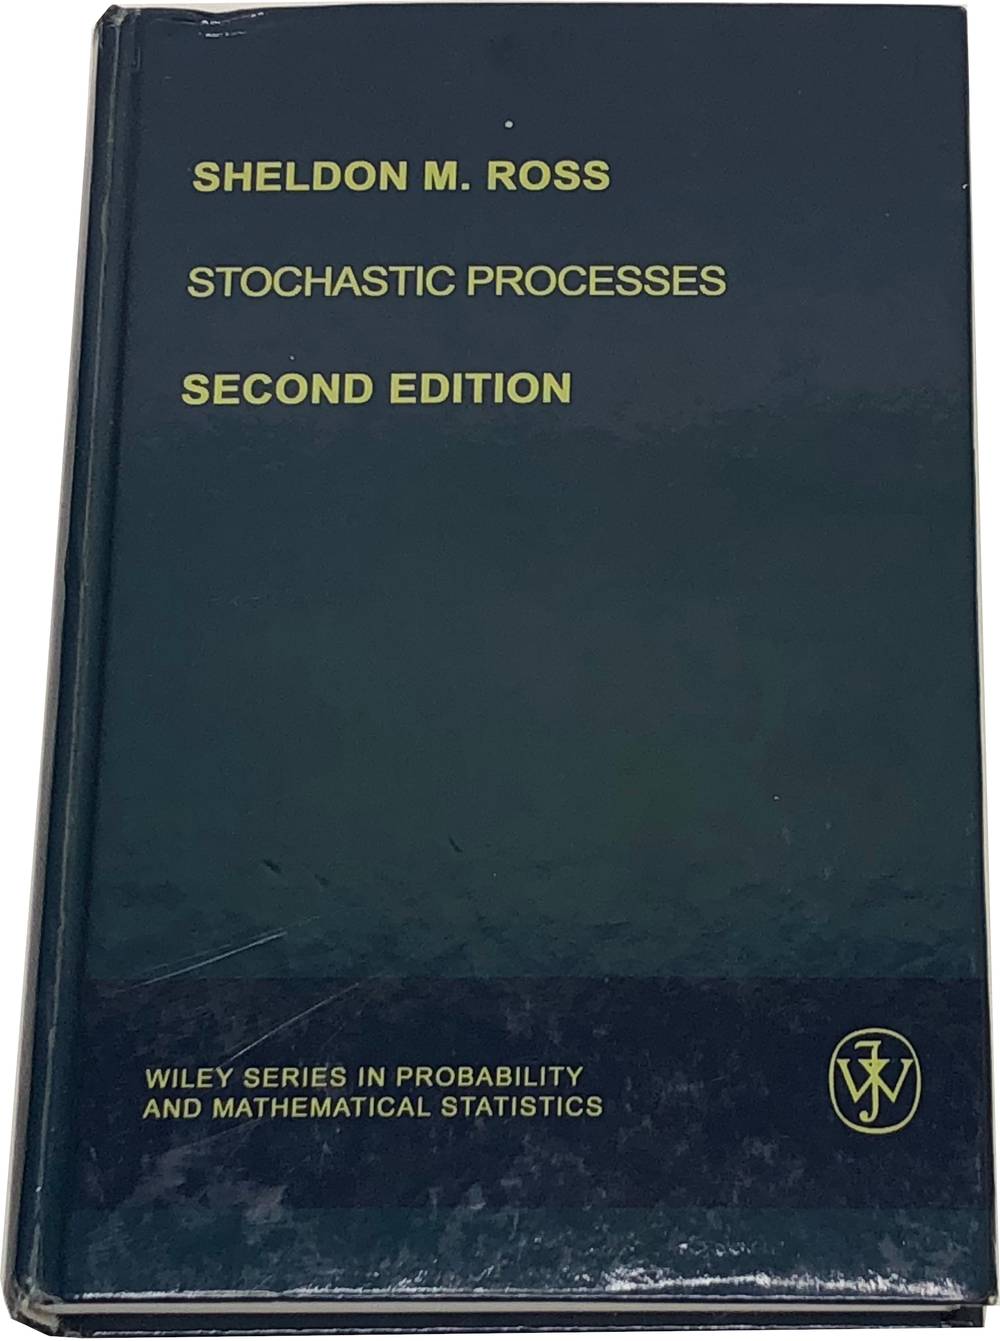 Book image of Stochastic Processes.